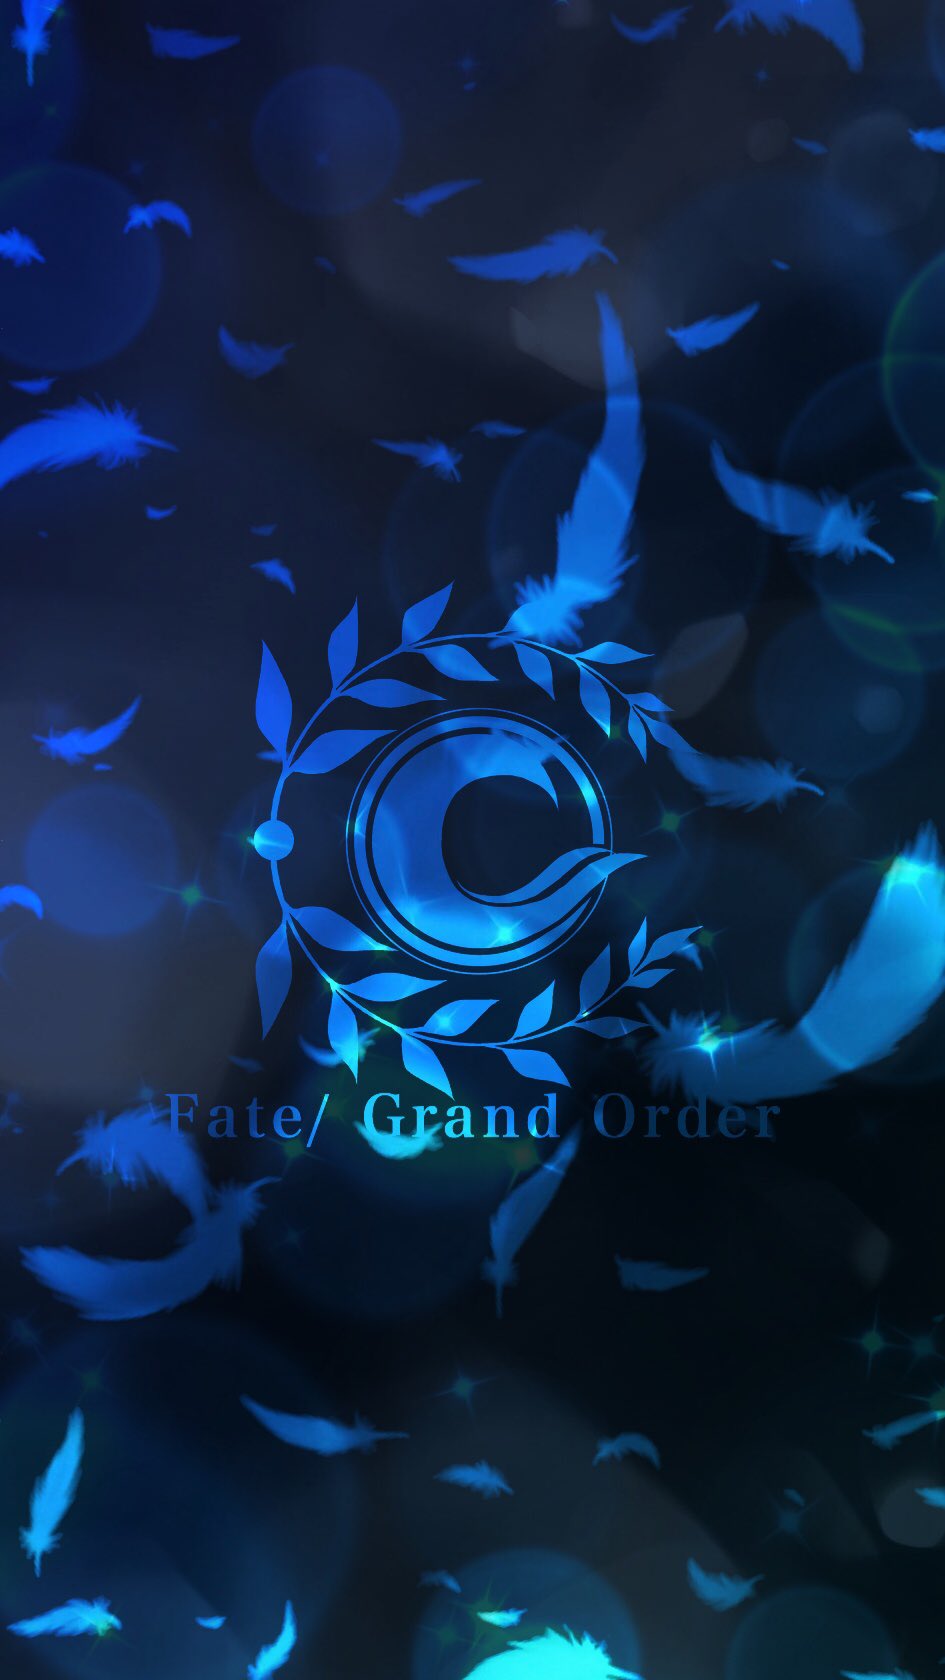 Twitter 上的 輝桜 燁桜の壁紙宝庫 第240弾 Fate Fate Grand Orderの壁紙です 涼しげな水のイメージです Fate Fgo Fatego Fate壁紙宝庫 T Co Yfxzxn7knt Twitter